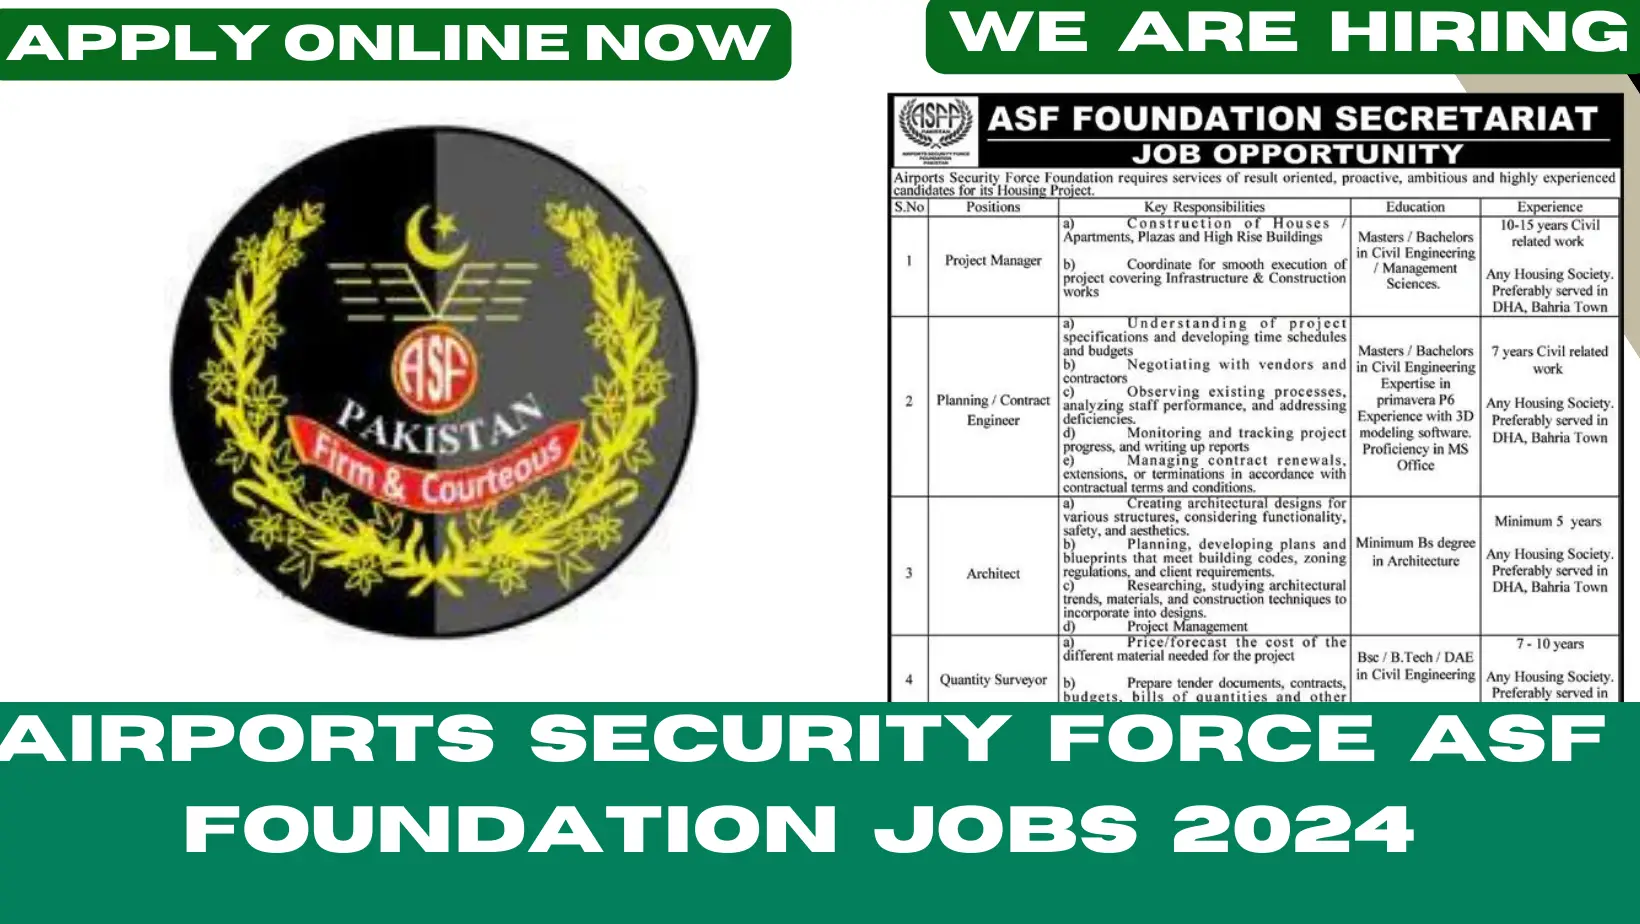 AIRPORTS SECURITY FORCE ASF FOUNDATION JOBS